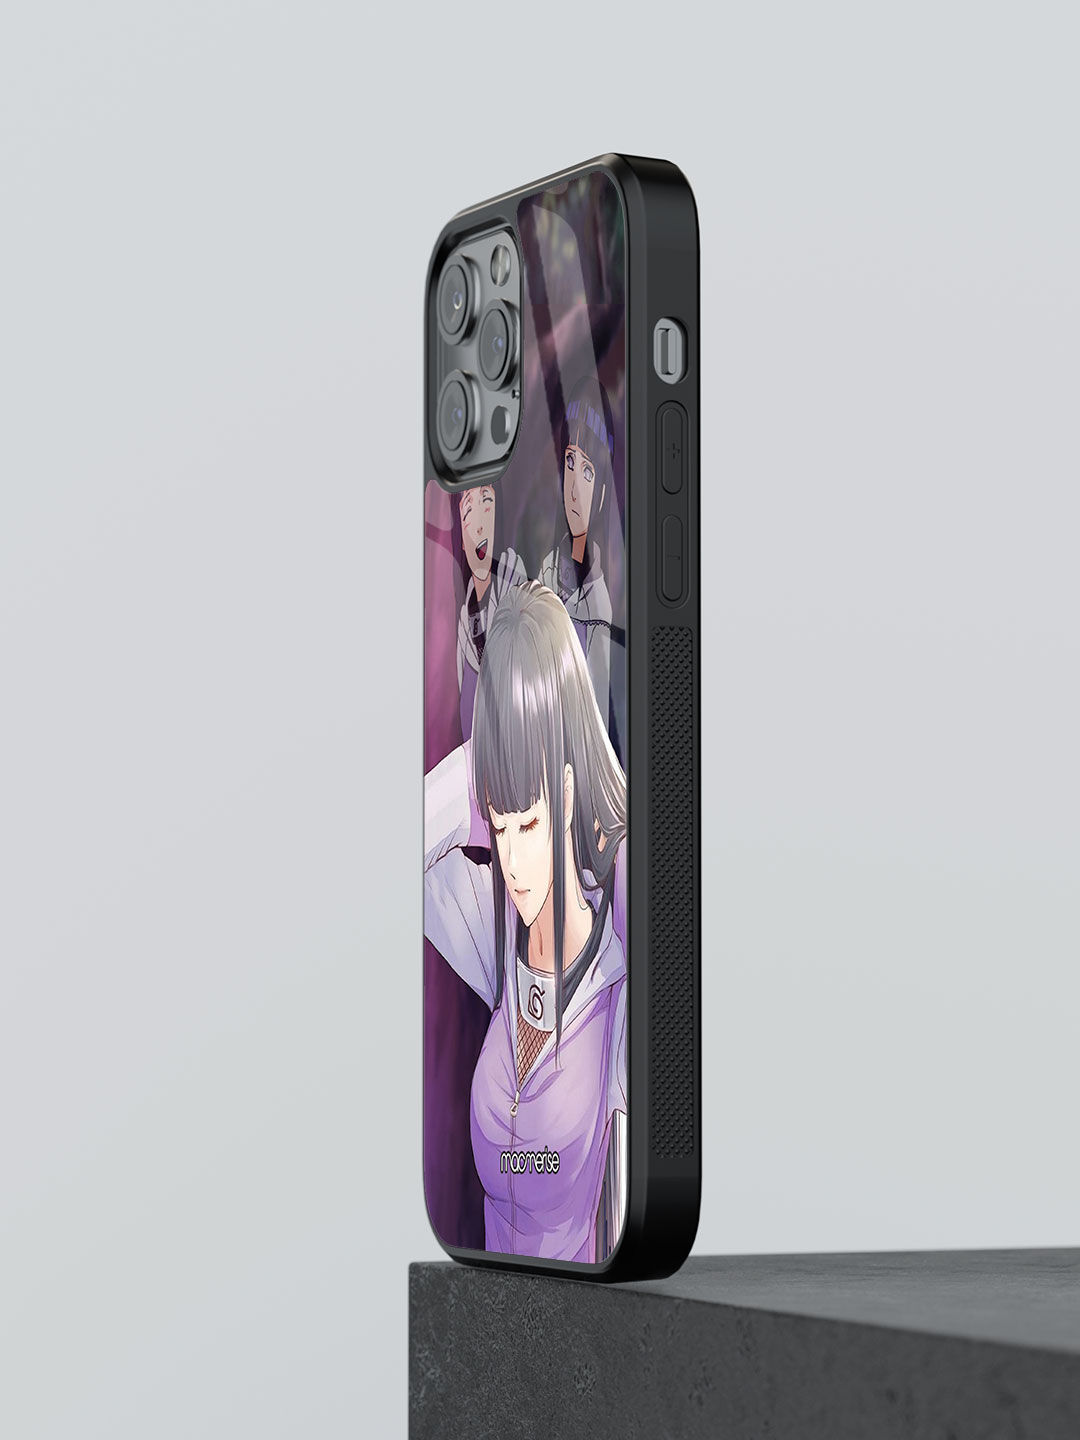 Phases of Hinata Hyuga - Glass Case For iPhone 13 Pro Max